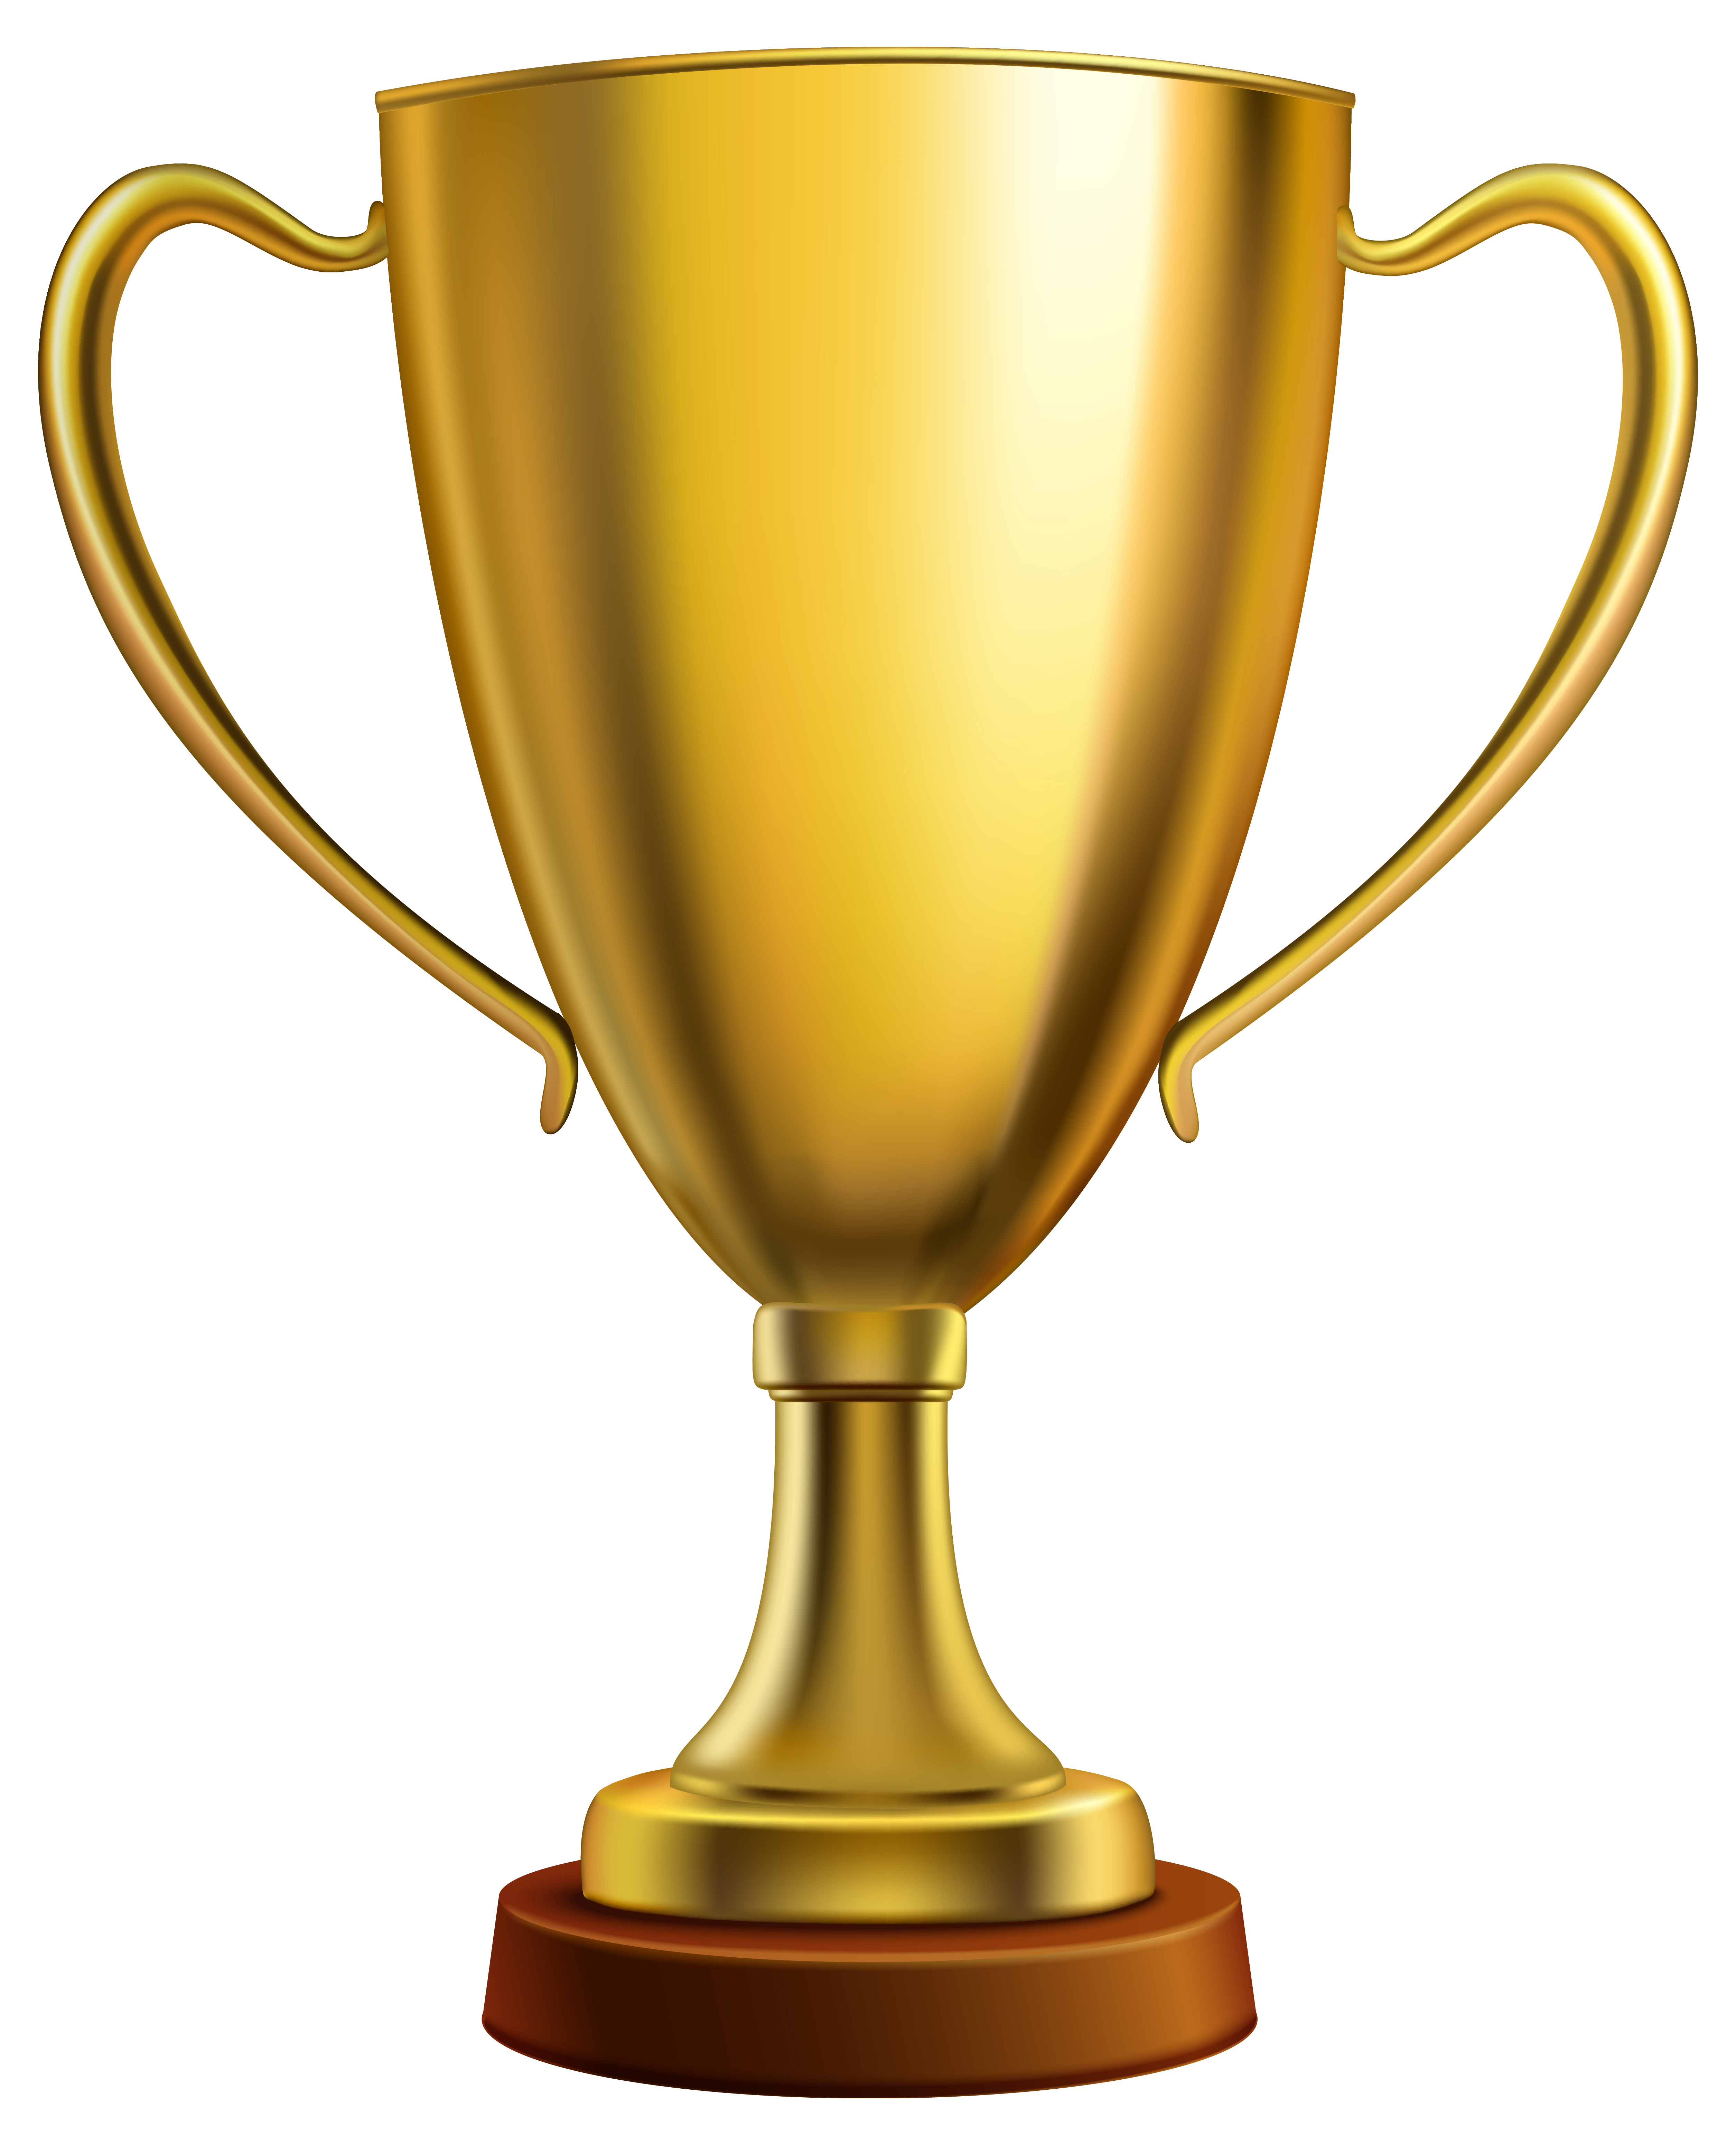 Gold Cup Trophy PNG Clipart Image.